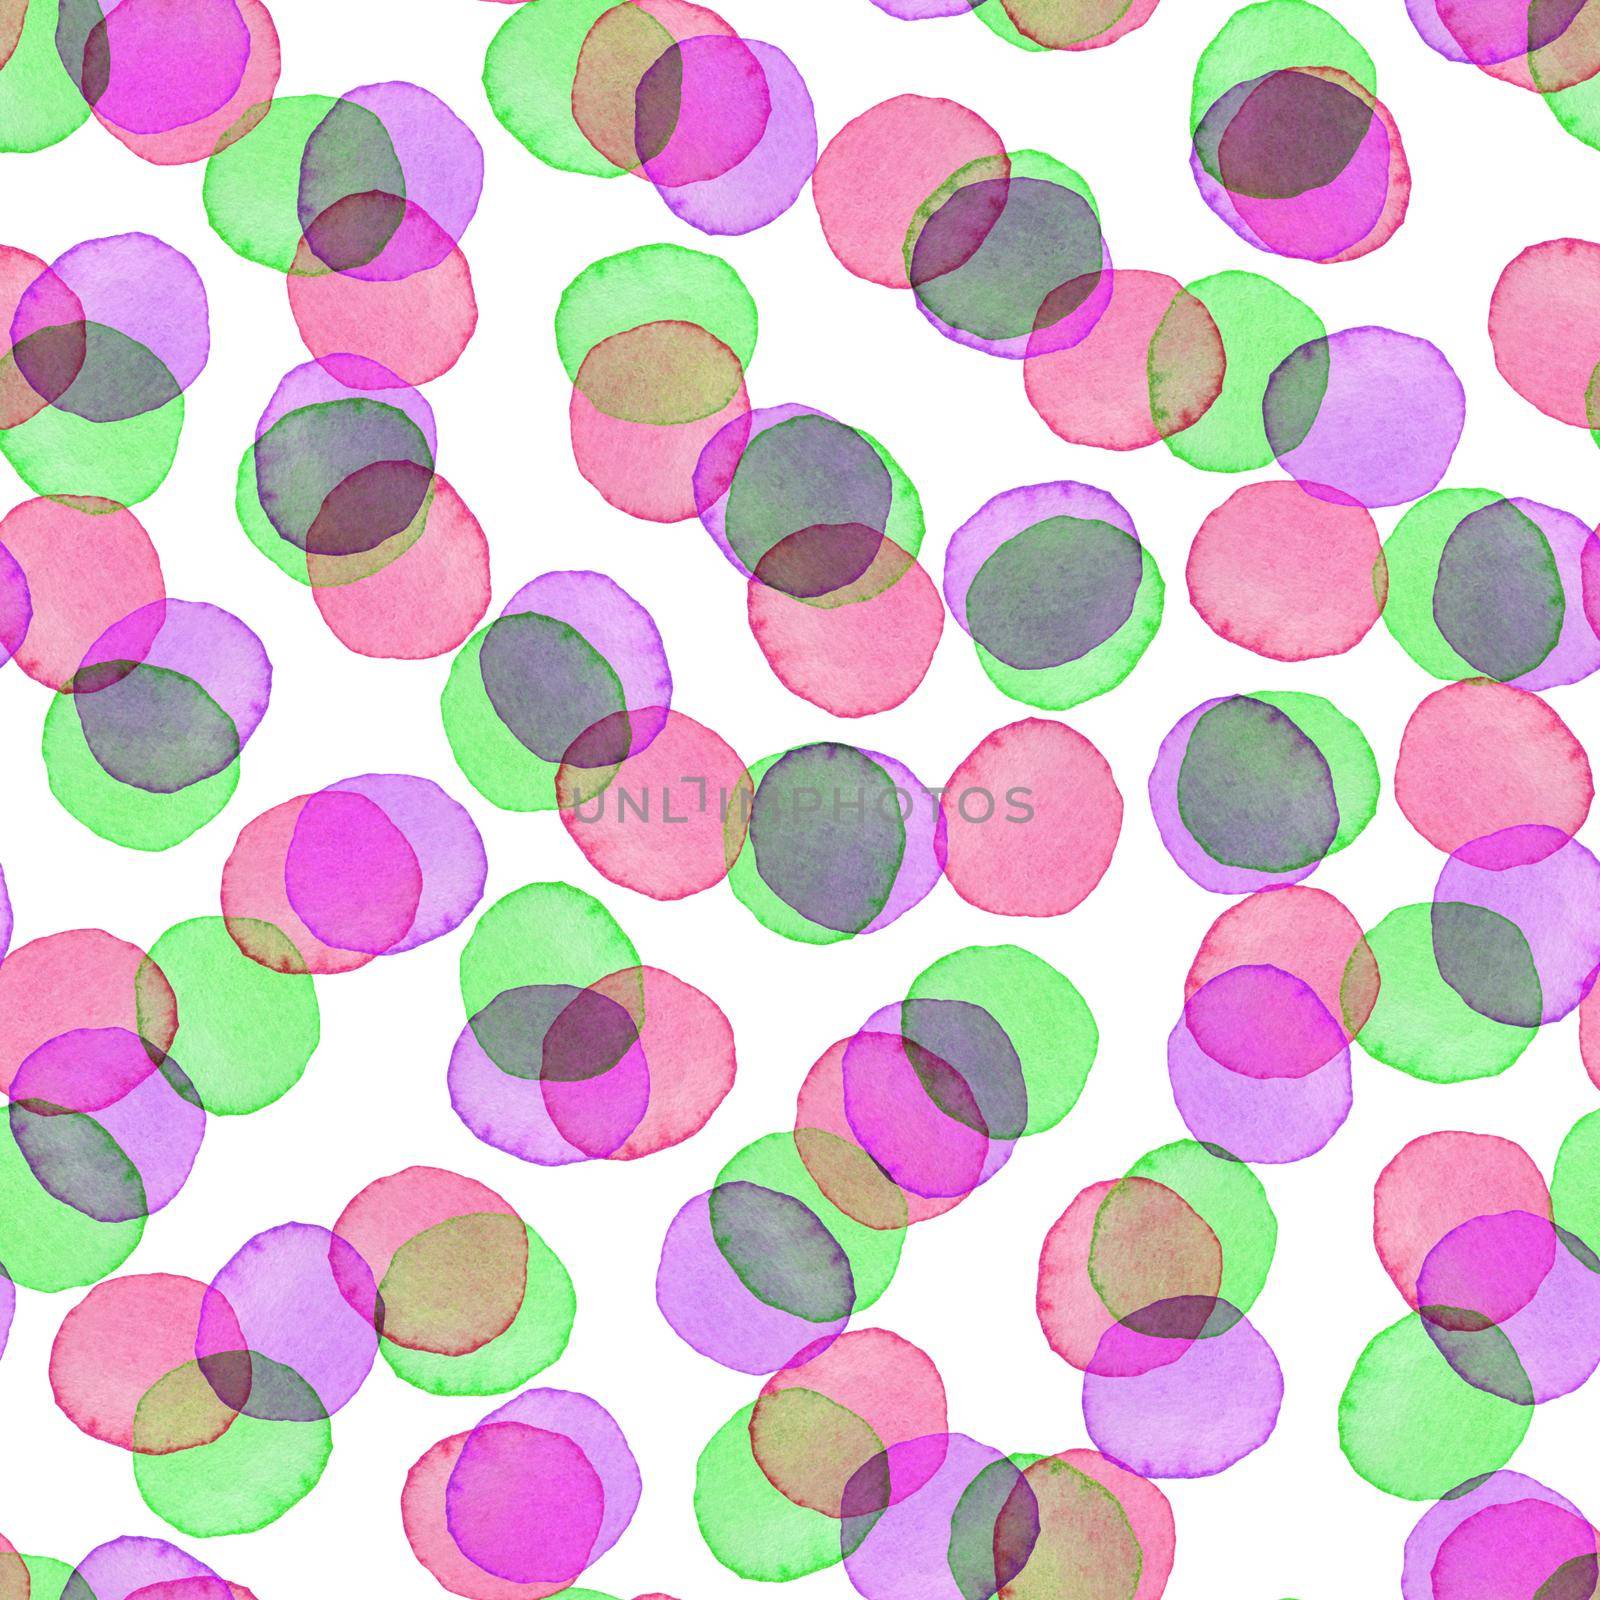 Hand Painted Brush Polka Dot Girly Seamless Watercolor Pattern. Abstract watercolour Round Circles in Purple Green Color. Artistic Design for Fabric and Background by DesignAB